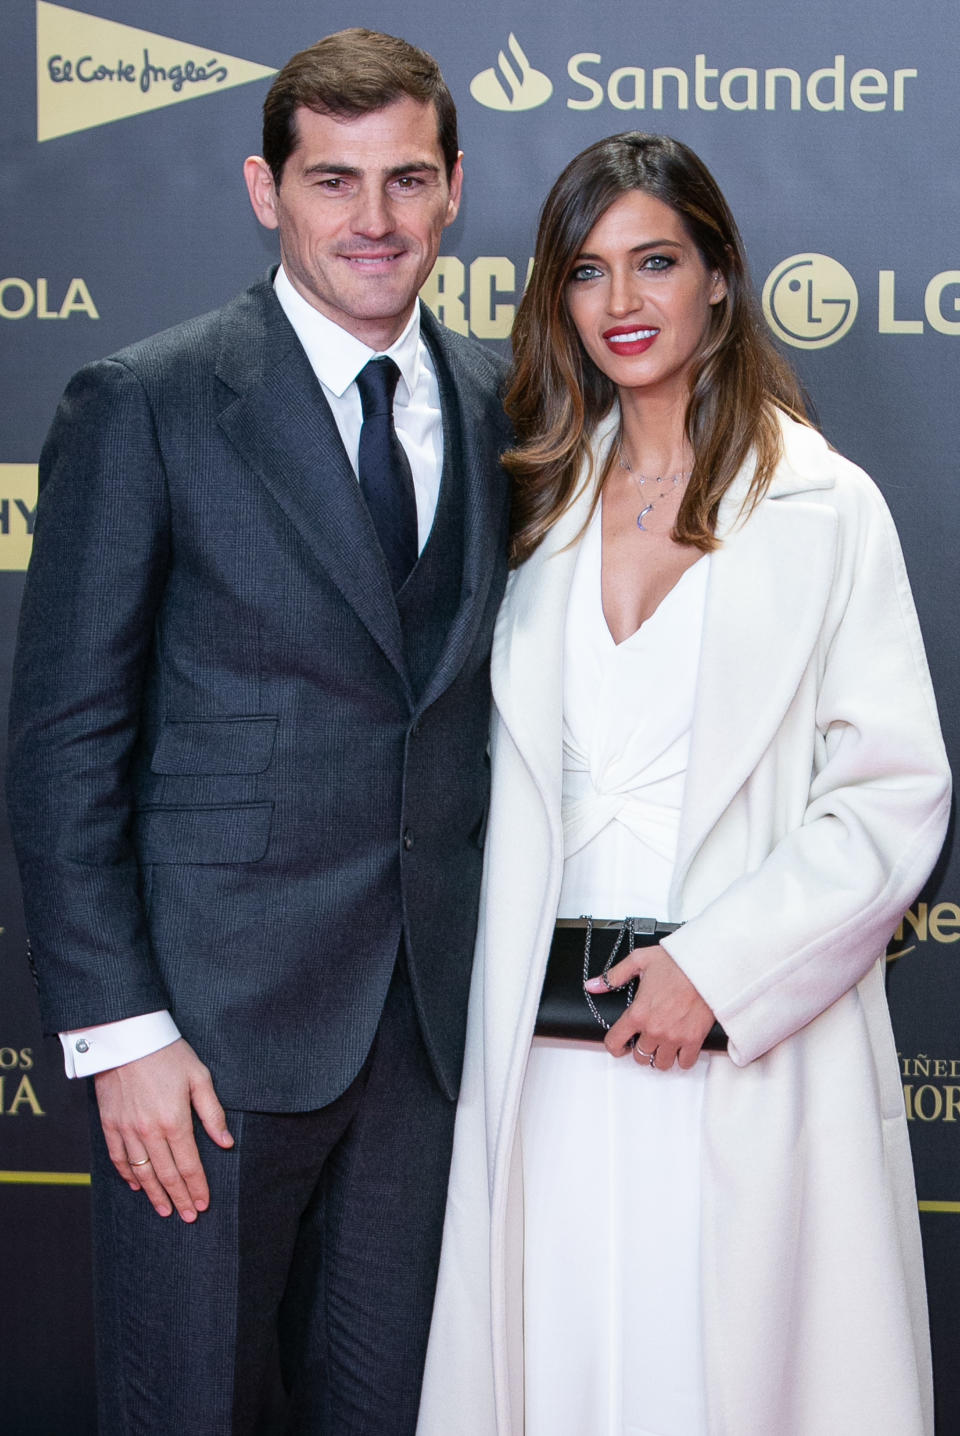 MADRID, SPAIN - DECEMBER 13:  (L-R) Iker Casillas and his wife Sara Carbonero attend the 80th Anniversay of 'Marca' Newspaper at Royal Palace on December 13, 2018 in Madrid, Spain.  (Photo by Paolo Blocco/WireImage)